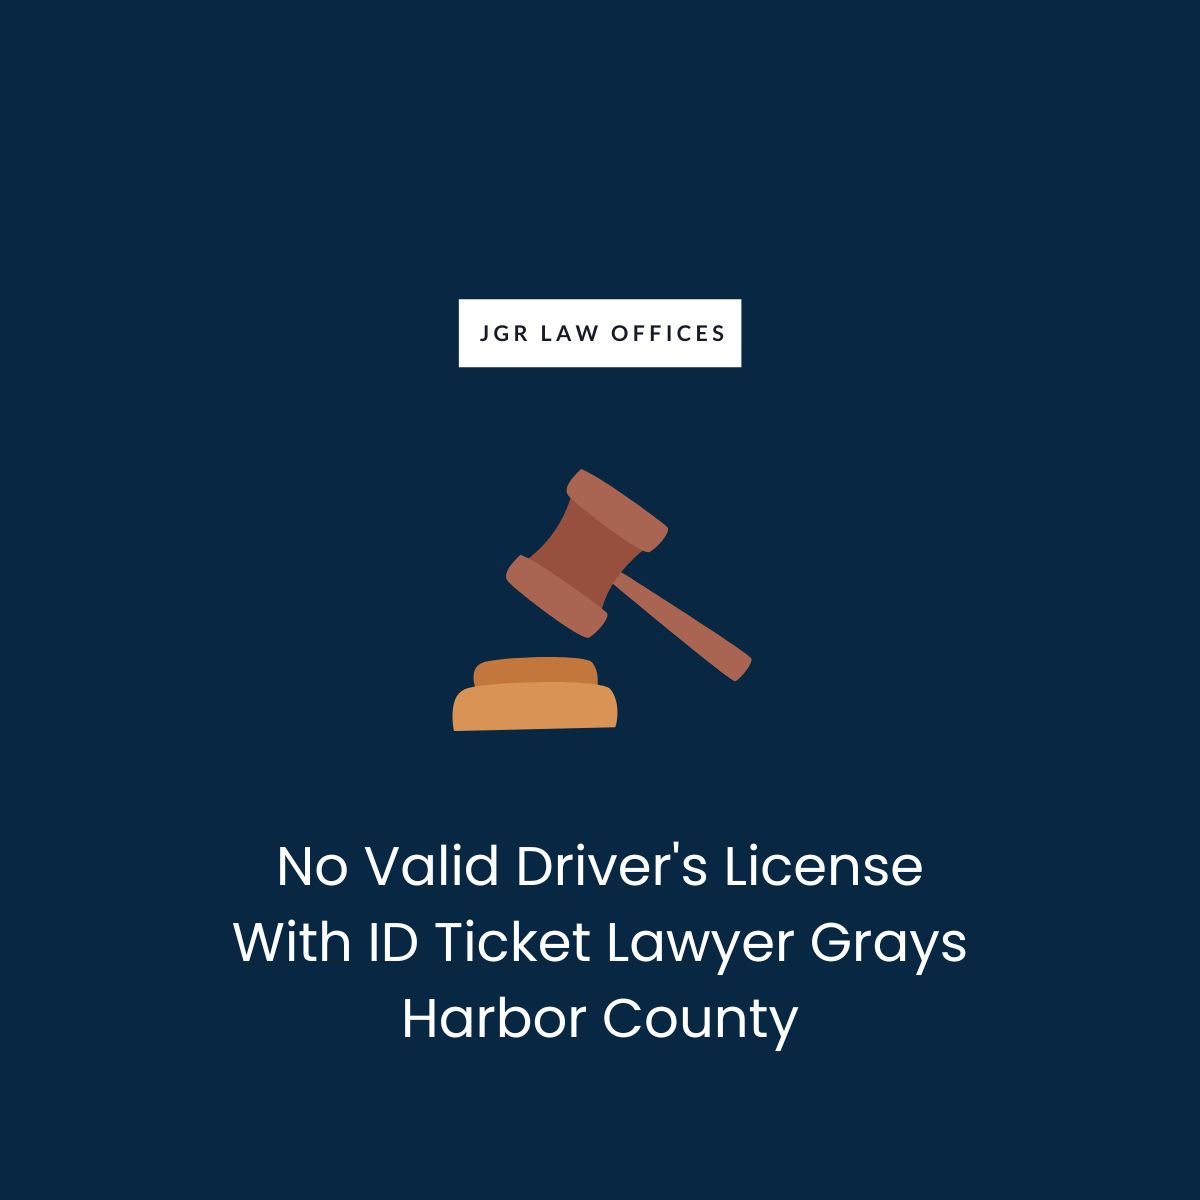 No Valid Driver's License With ID Ticket Attorney Grays Harbor County